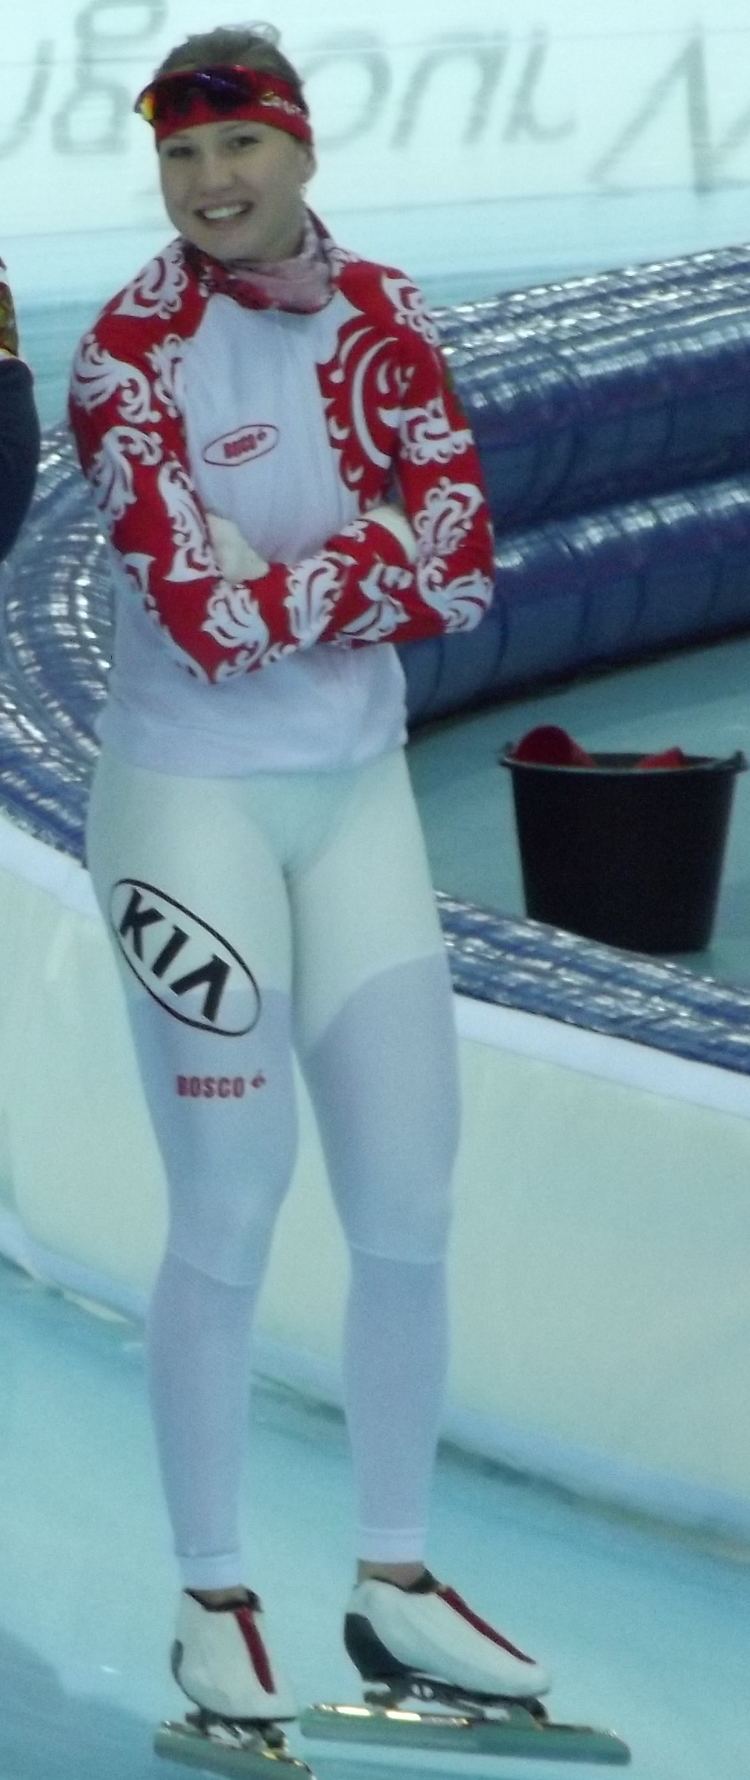 Olga Fatkulina smiling with folded arms and standing beside an ice rink and a black pail in the background, wearing white gloves, white leggings with prints, a red headband, sunglasses, and a red and white figure skates red and white long-sleeved jacket with prints